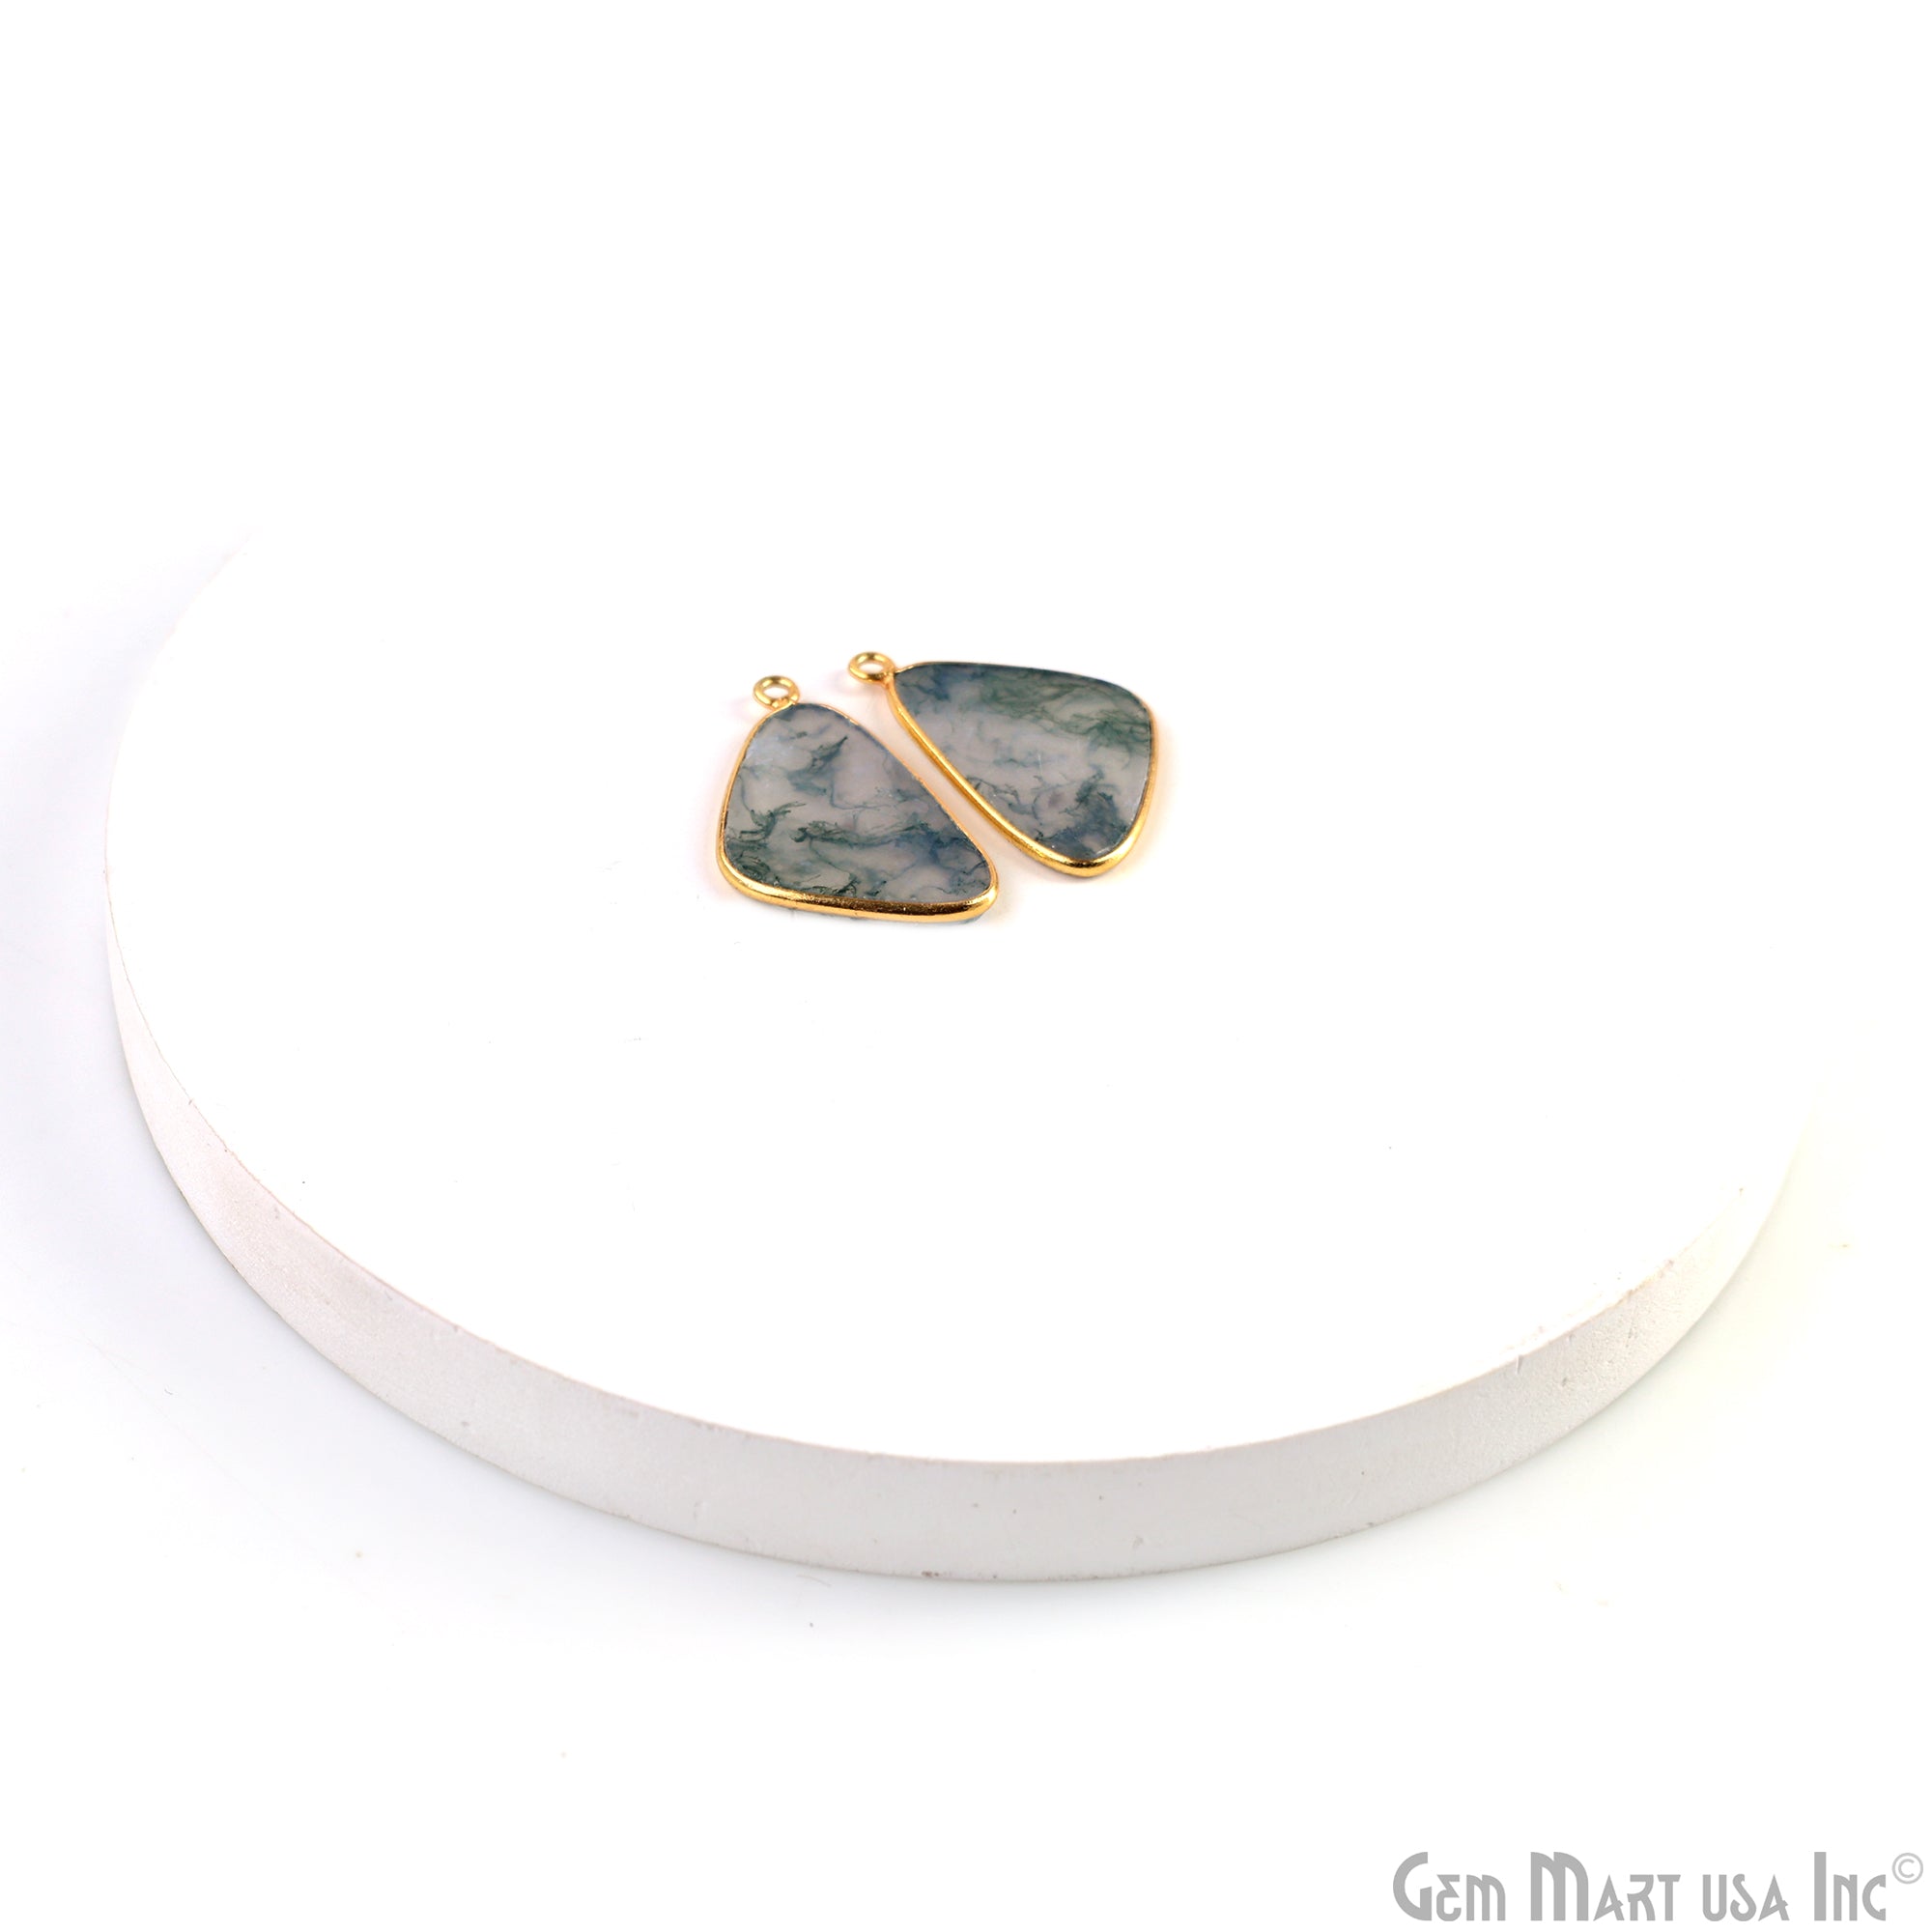 Moss Agate D Shape Gold Plated Single Bail Bezel Smooth Slab Slice Thick Gemstone Connector 30x17mm 1 Pair